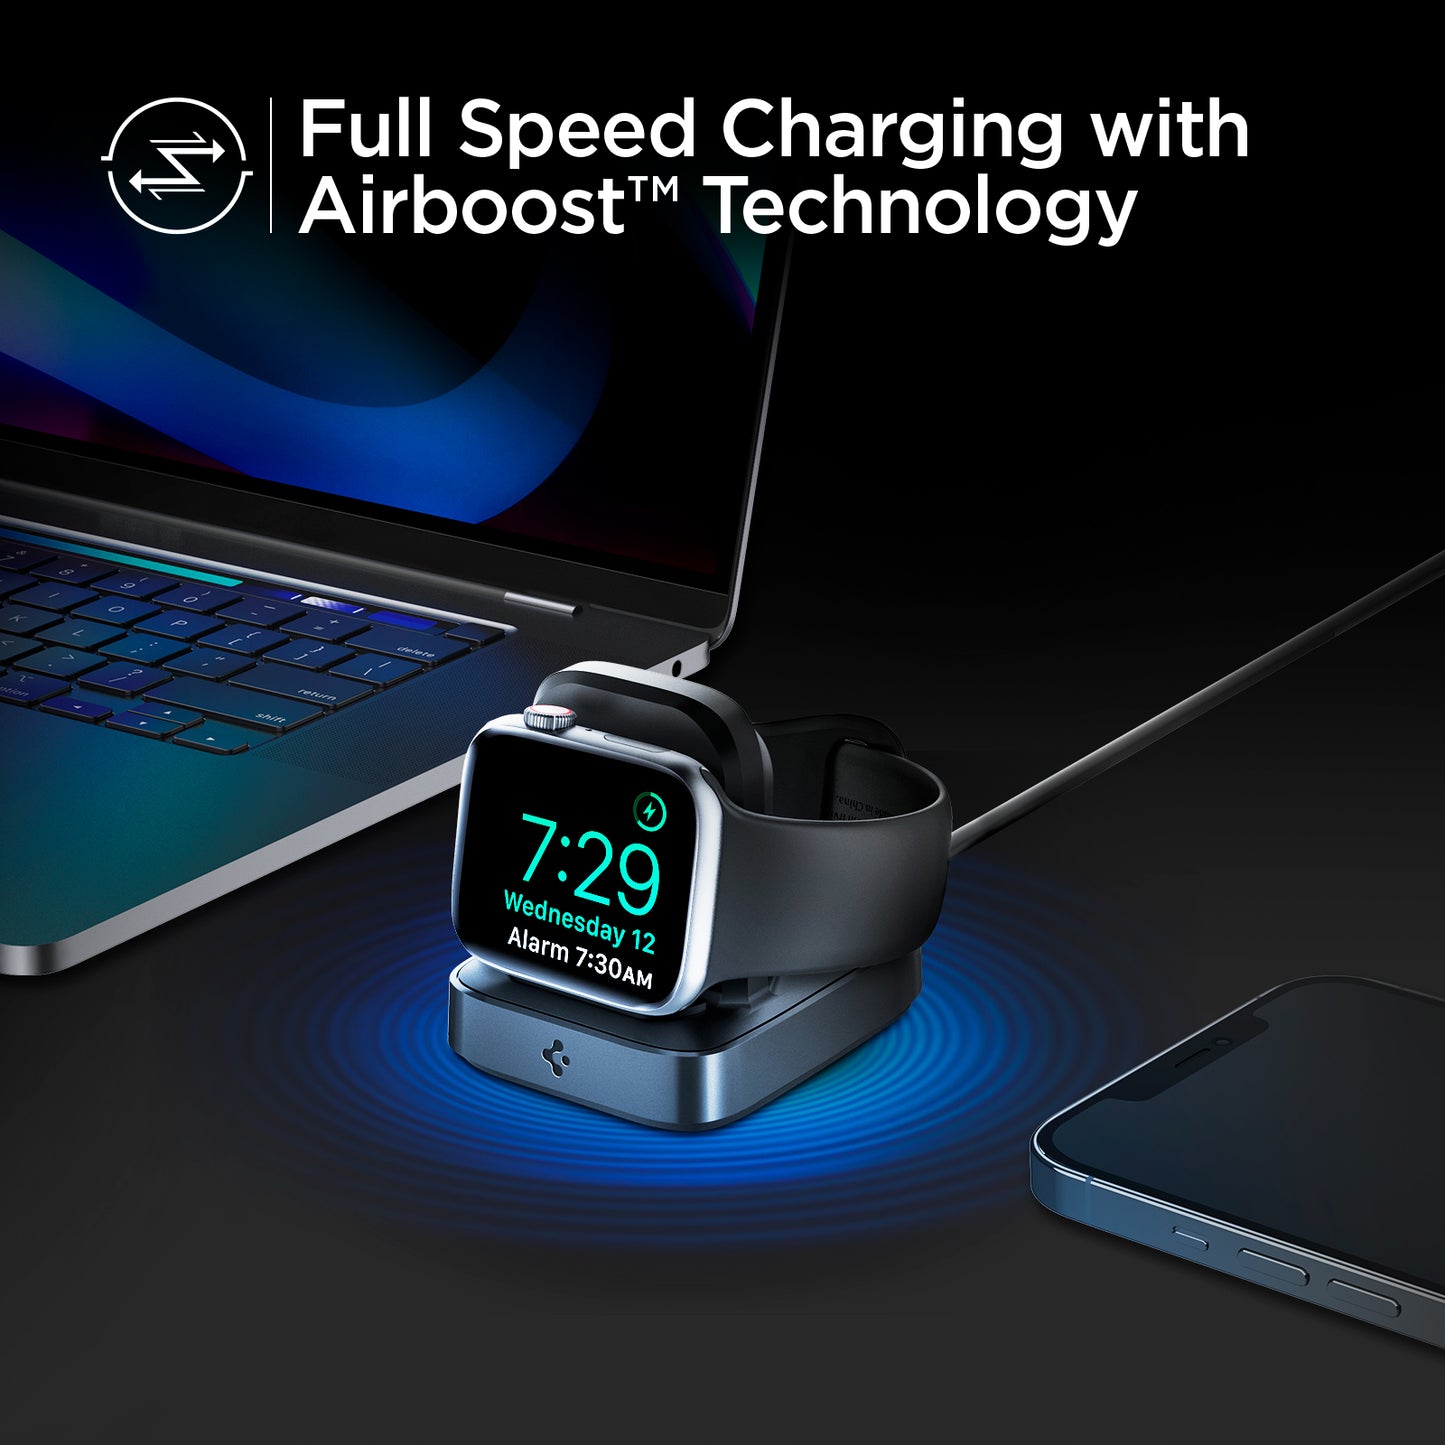 000CH25522 - Apple Watch ArcField™ 2.5W Wireless Charger PF2002 in Black showing the Full Speed Charging with Airboost Technology. Showing devices and apple watch on a wireless charger